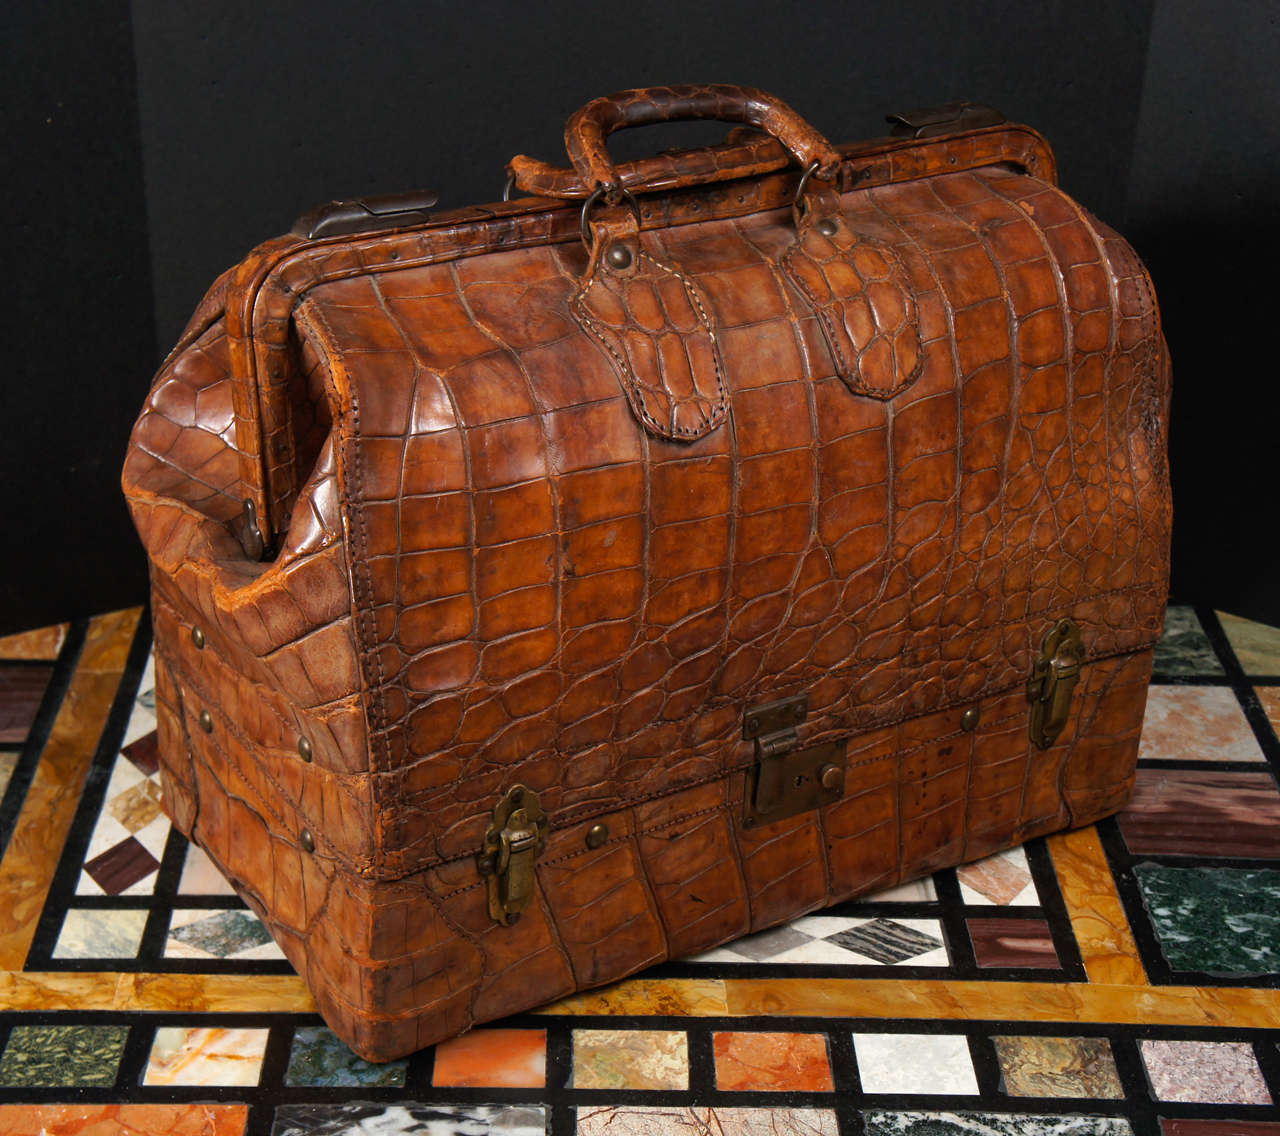 This incredable vintage alligator hide large bag  from the  Edwardian era is a perfect stage prop for magazines or papers. Impractical to use as a carry all or bag its weight and age would make it hard to manage and  all the seams ,locks and handle